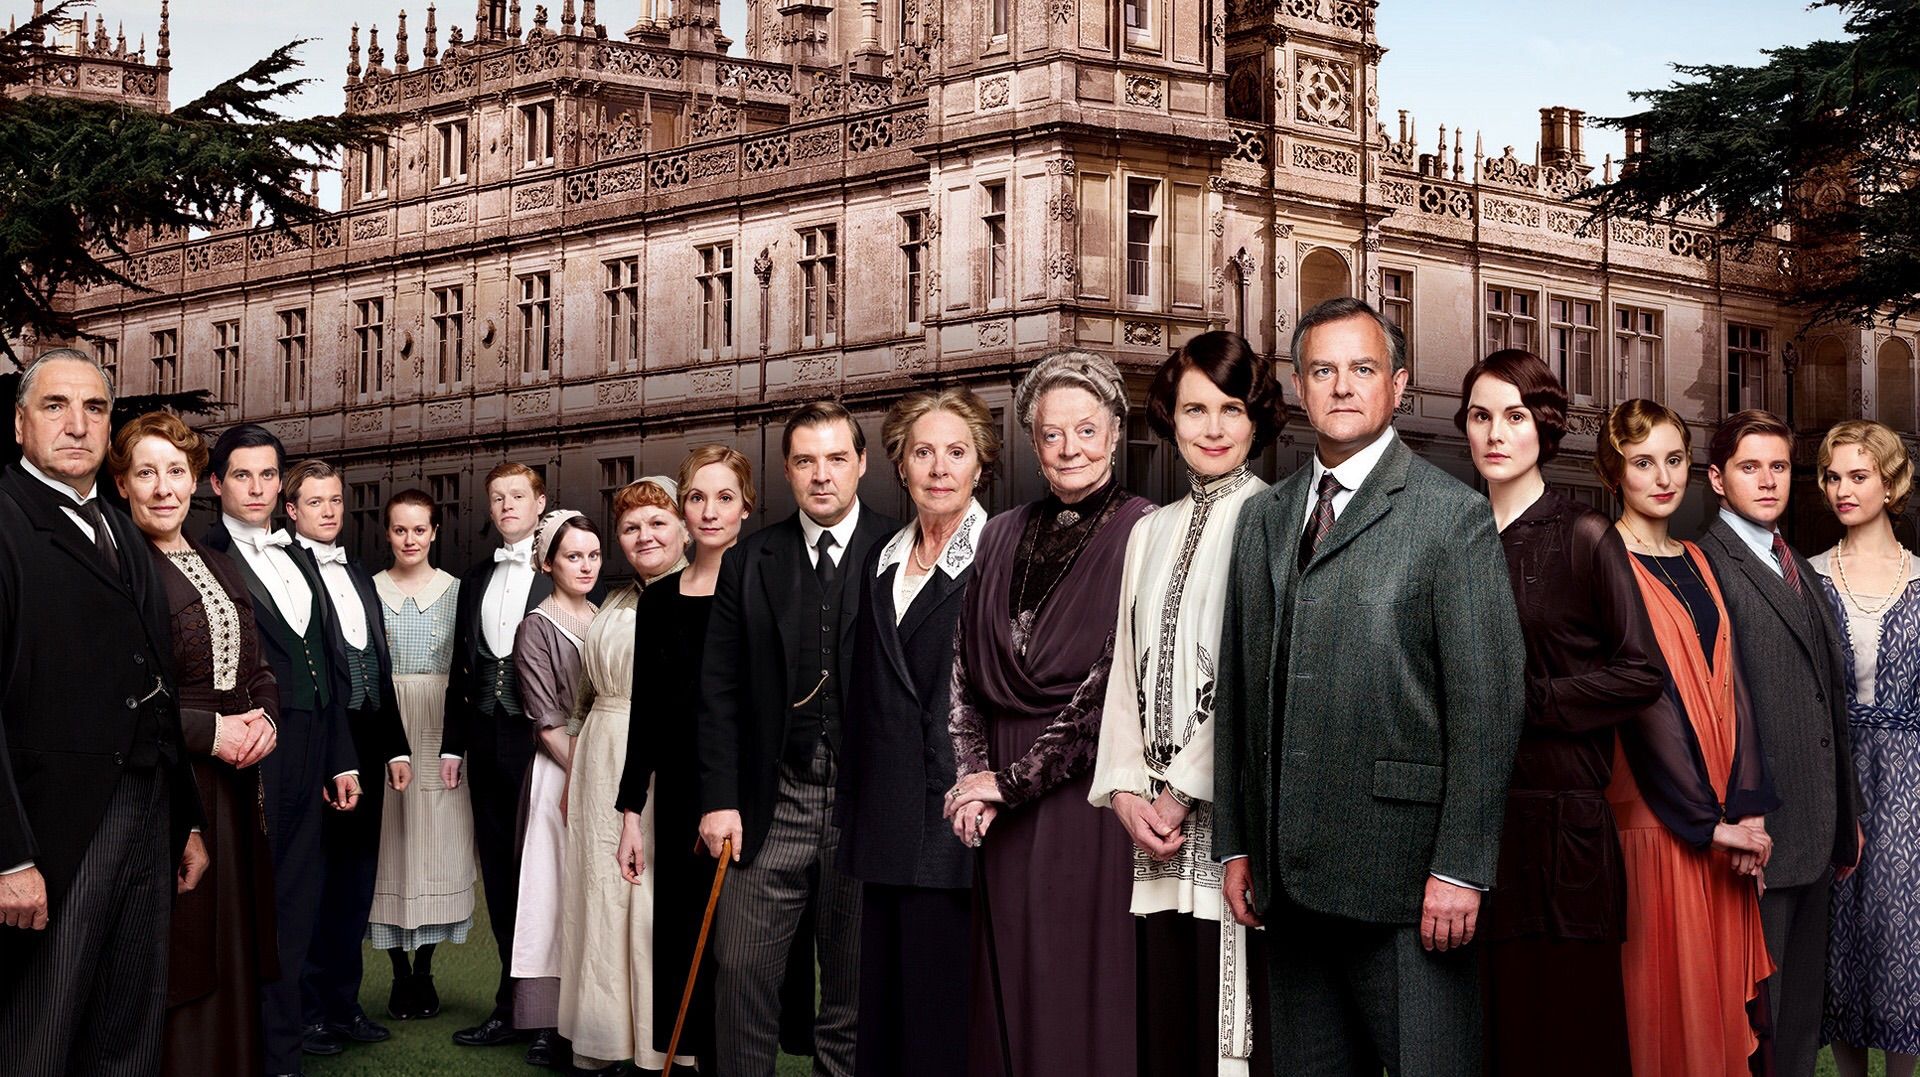 'Downtown Abbey' Producers Considering Movie or Other Spin-Off Possibilities